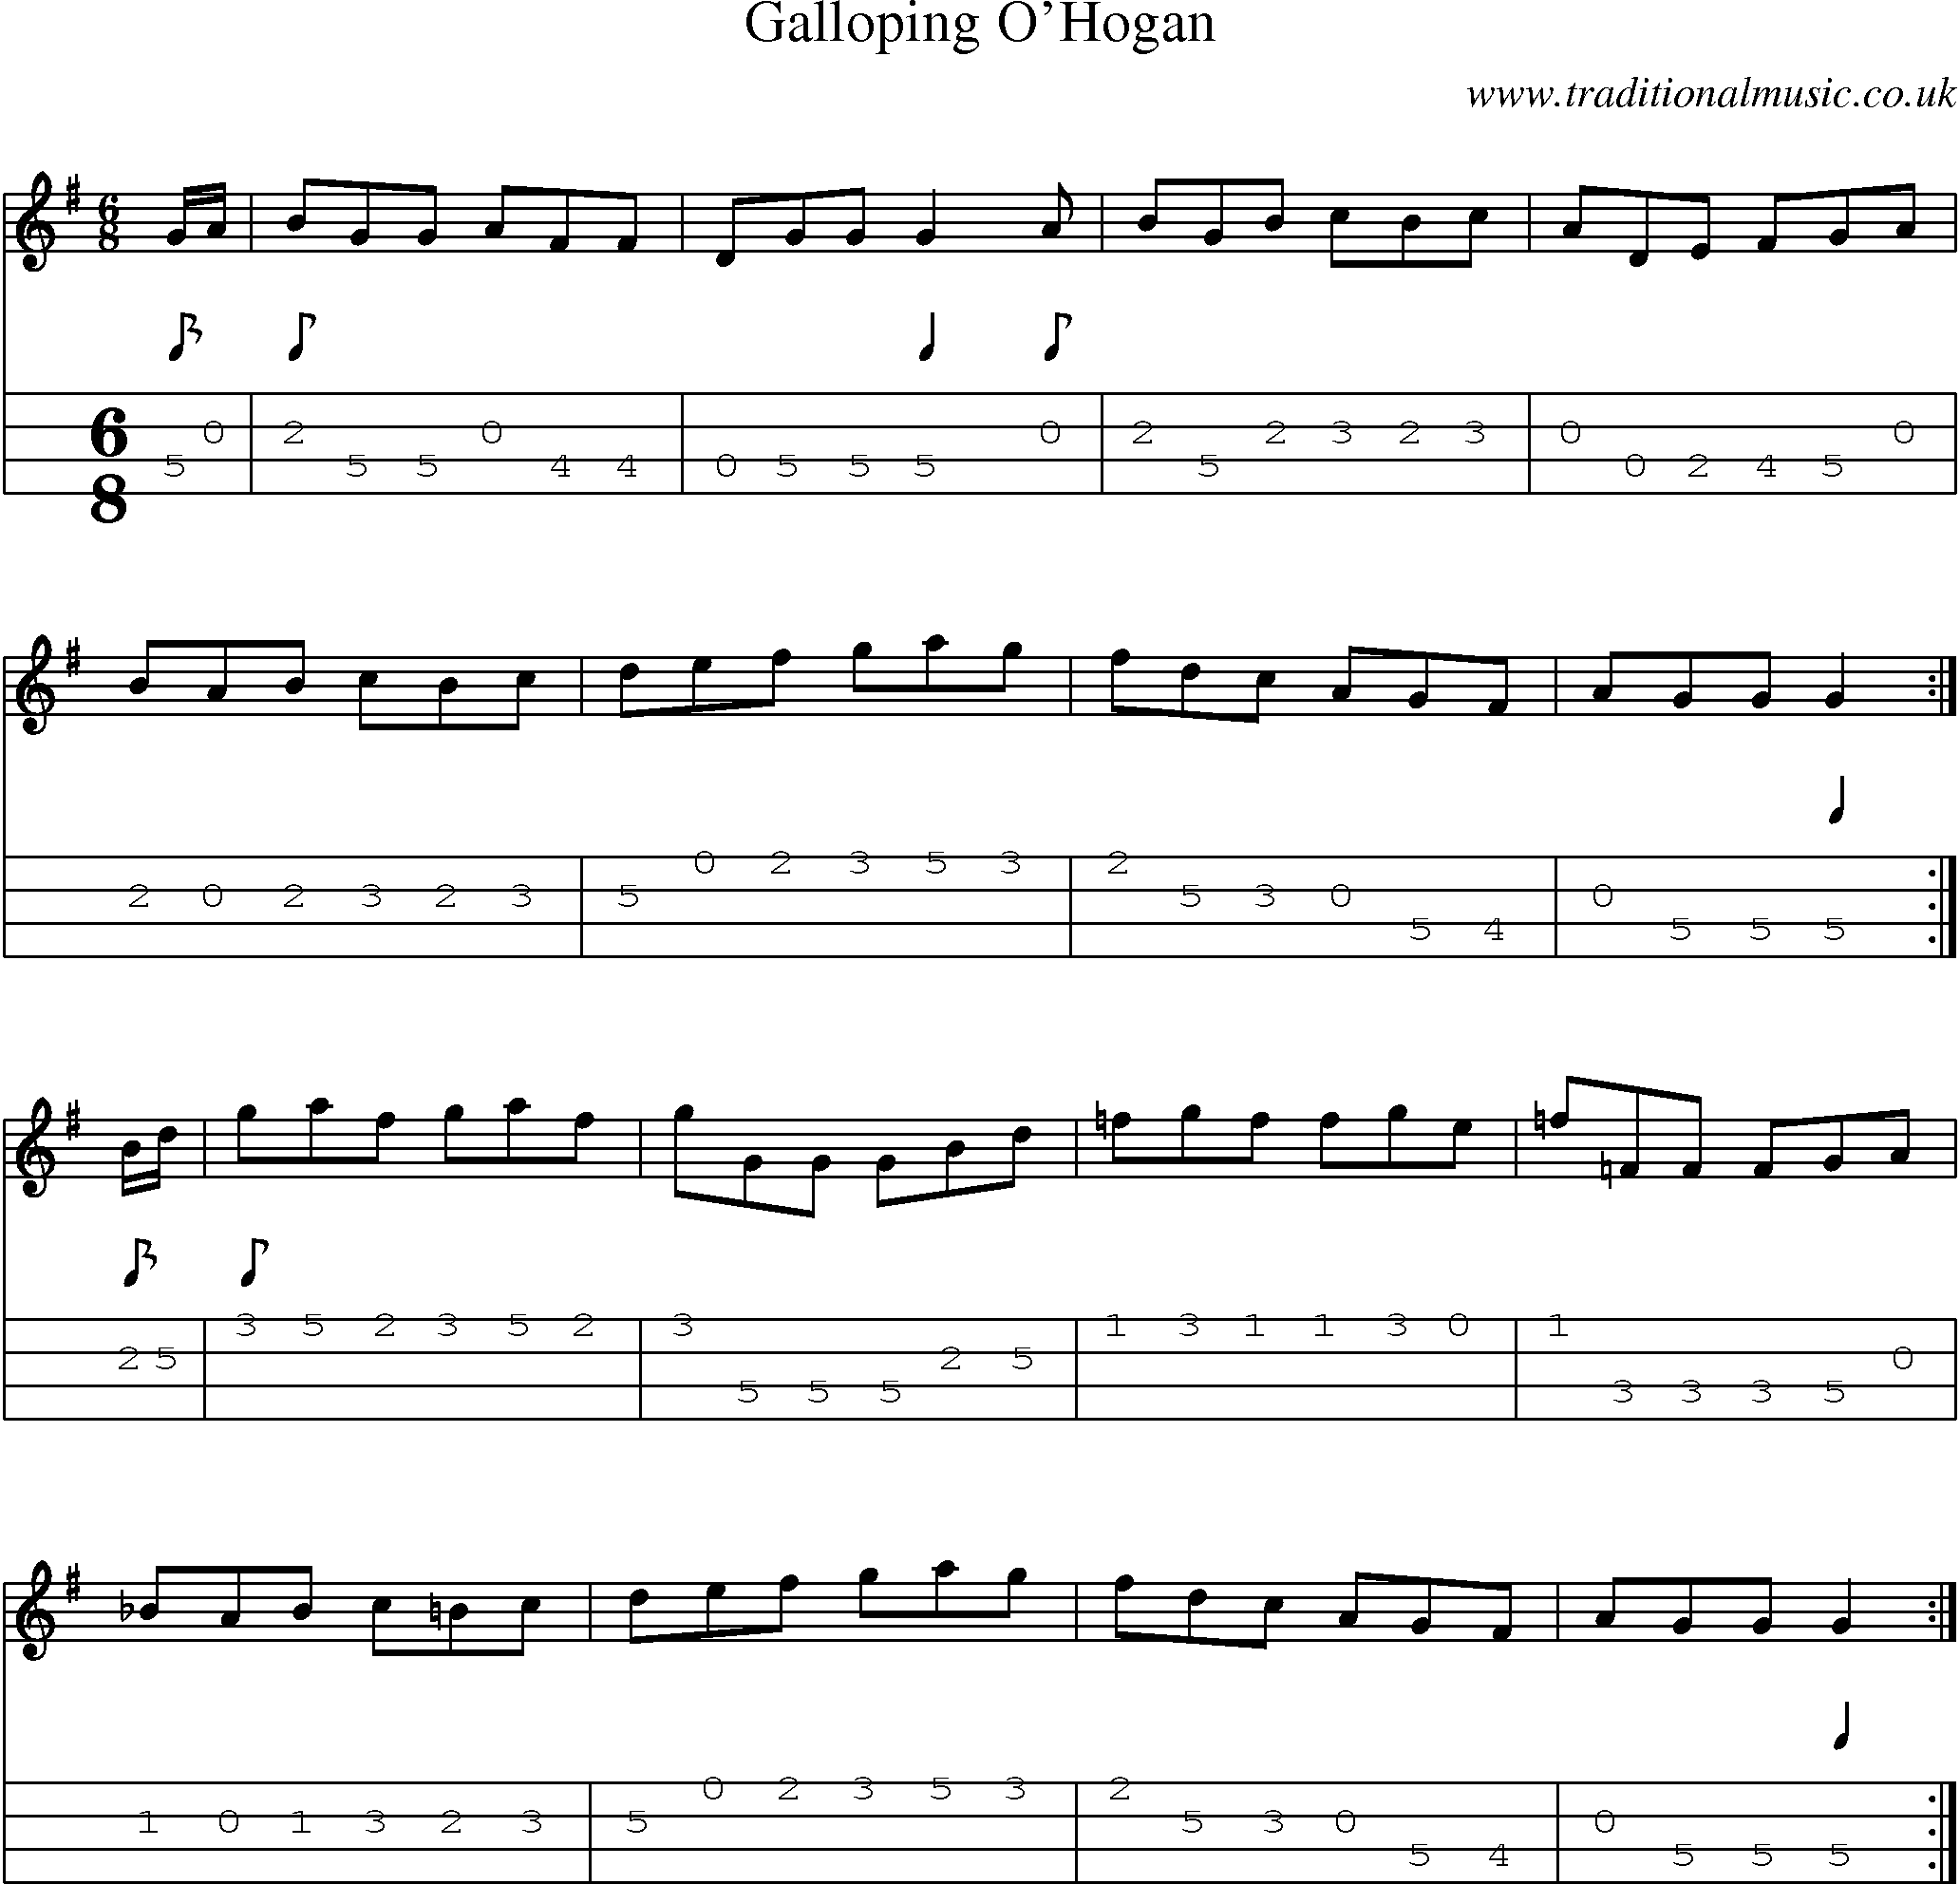 Music Score and Mandolin Tabs for Galloping Ohogan